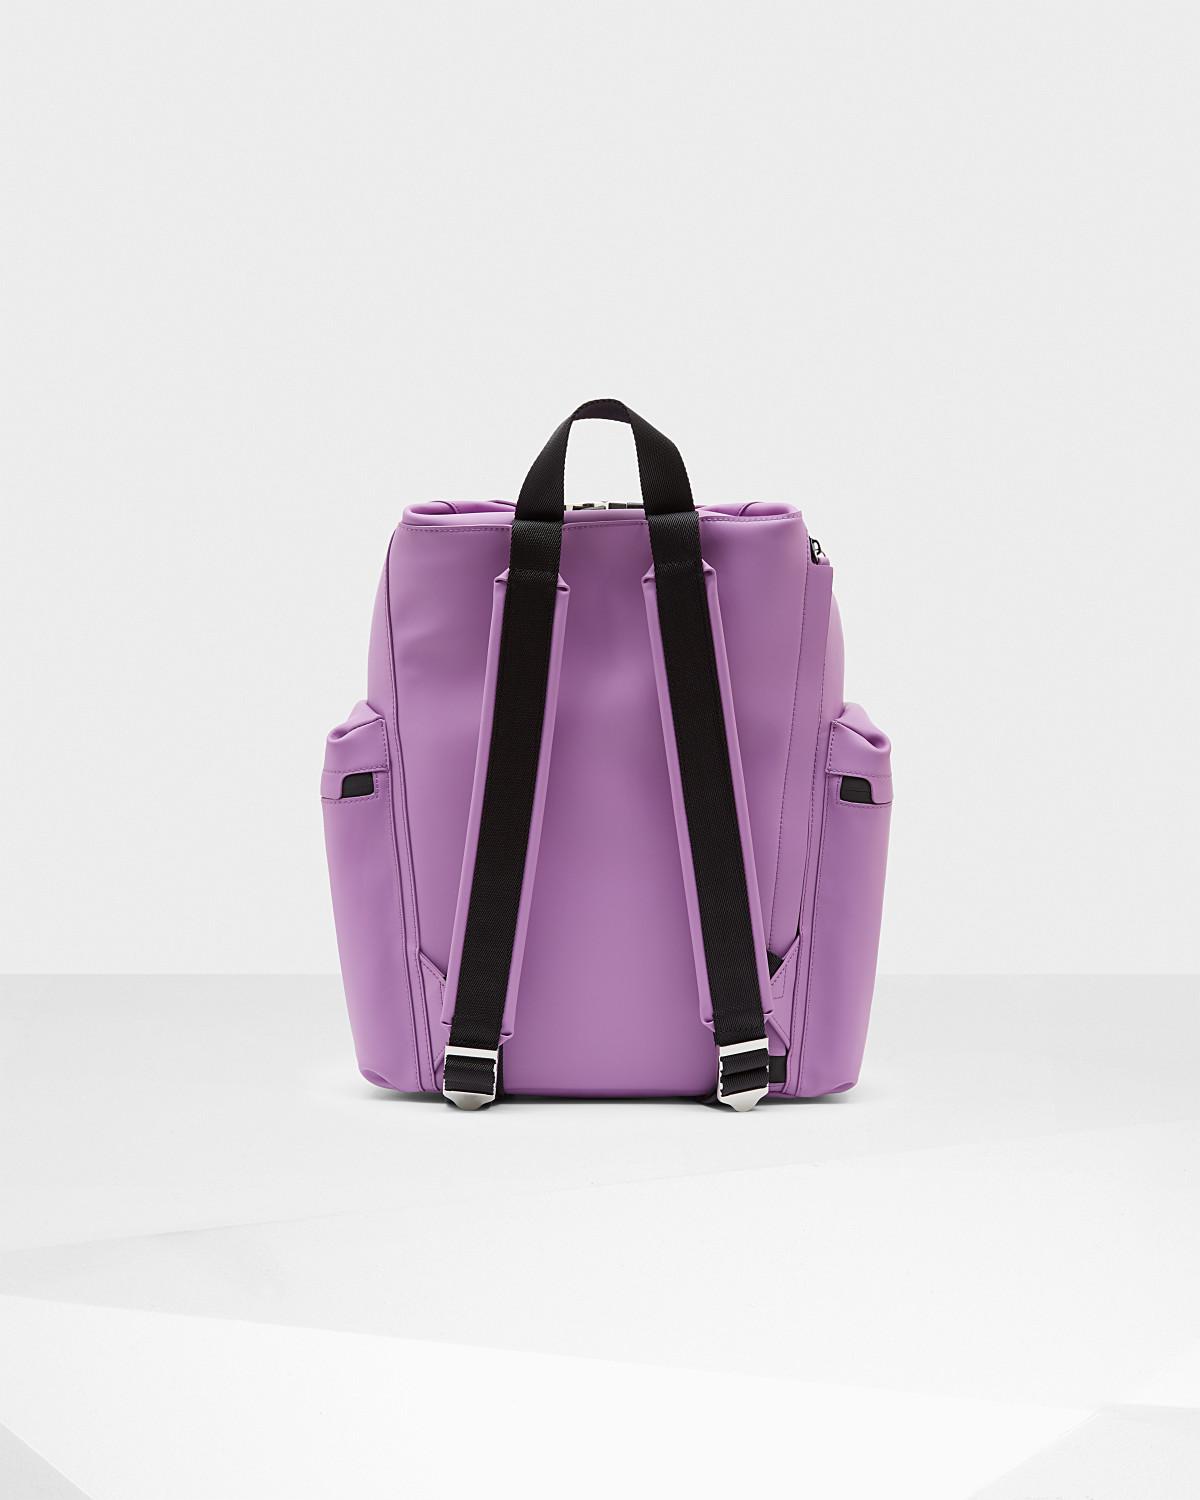 HUNTER Original Top Clip Backpack - Rubberized Leather in Purple | Lyst